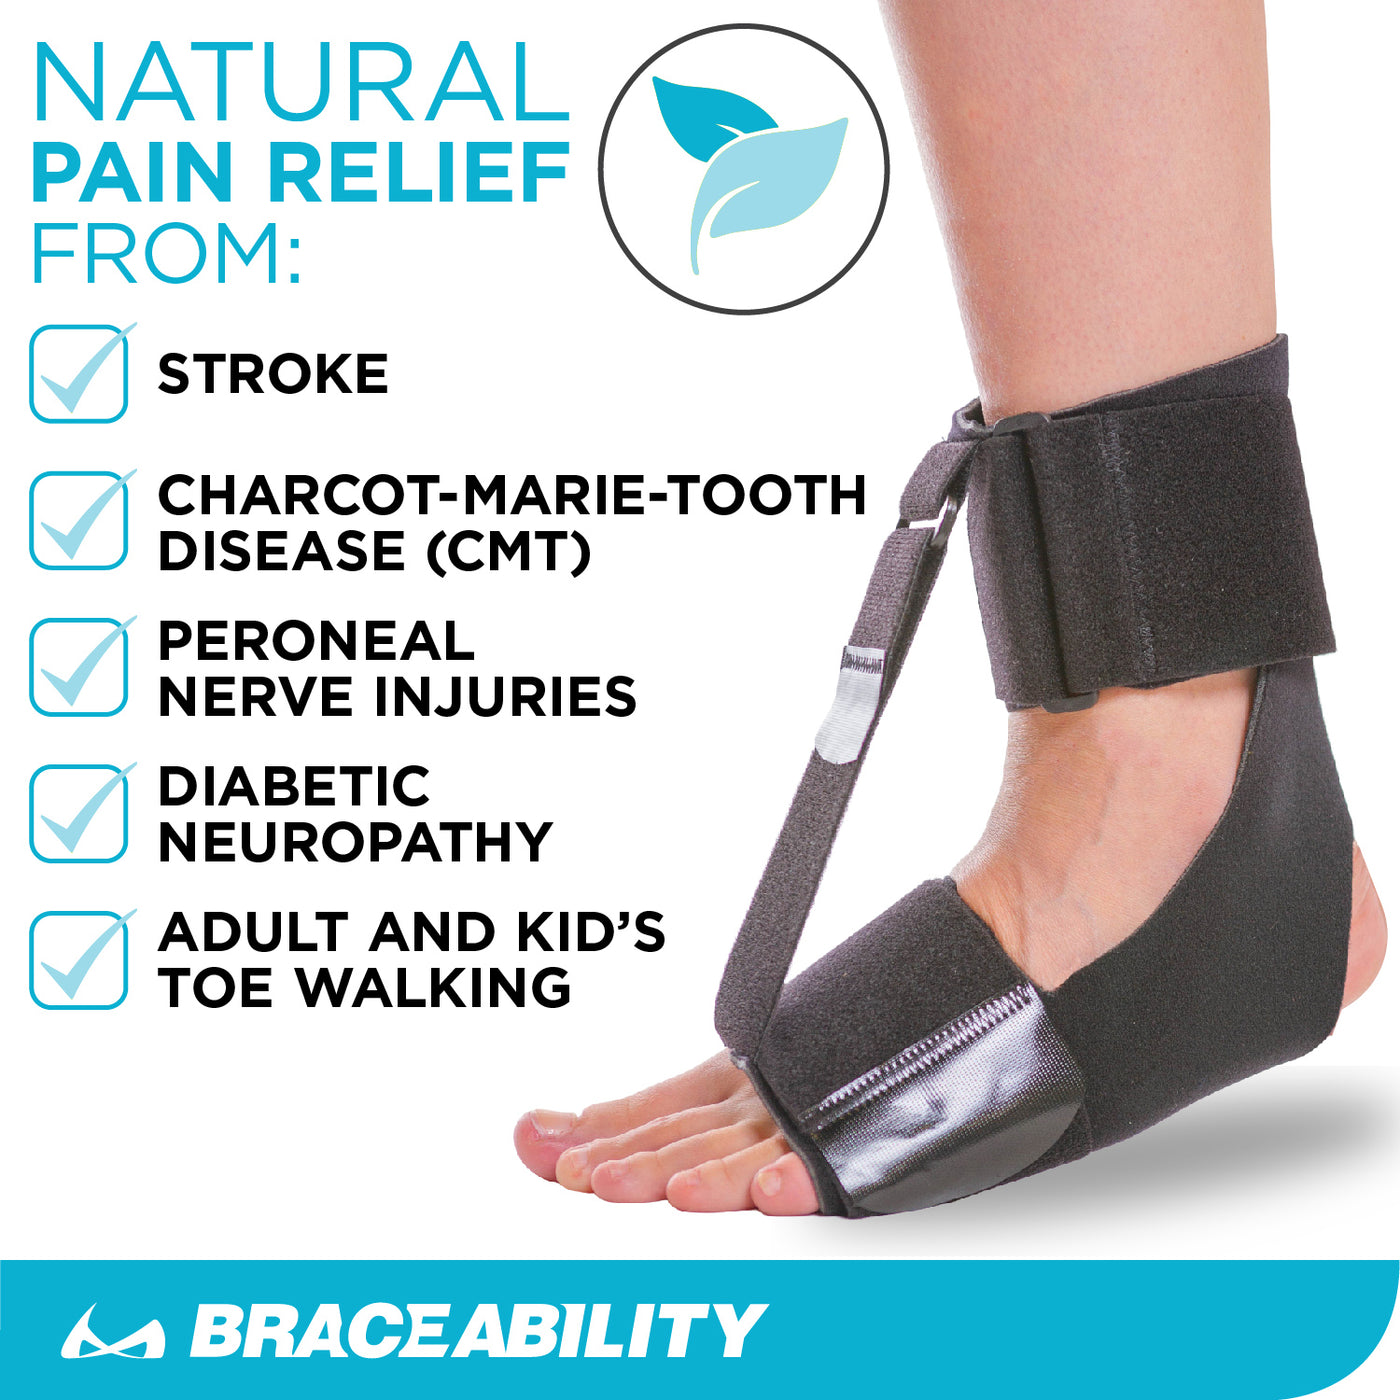 our ankle brace for foot drop relieves symptoms from stroke, peroneal nerve injuries, and toe walking